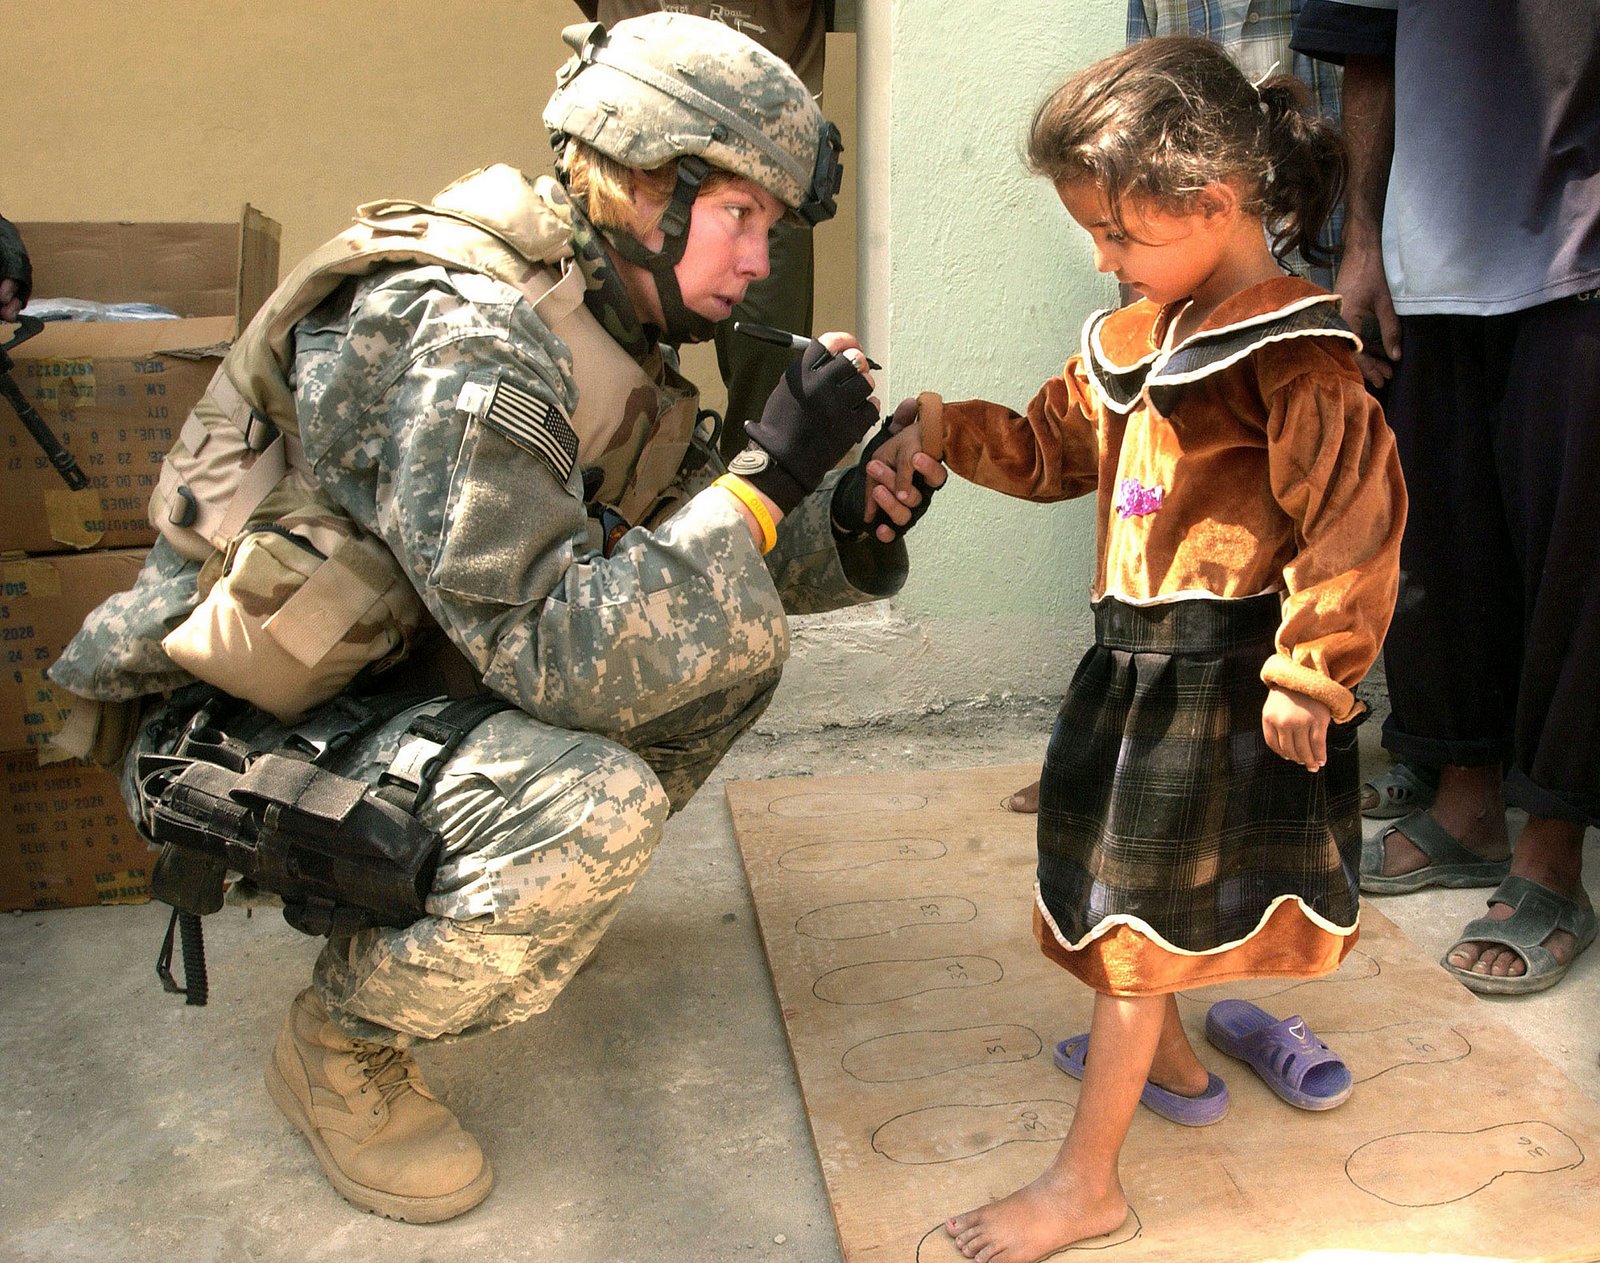 [An+Iraqi+girl+gets+her+feet+measured+for+a+new+pair+of+shoes.+U.S.+soldiers+assigned+to+B+Company,+448th+Civil+Affairs+Battalion,+gave+away+shoes+in+an+Al+Nafees+primary+school+in+Al+Kafajyeh,+Baghdad.jpg]